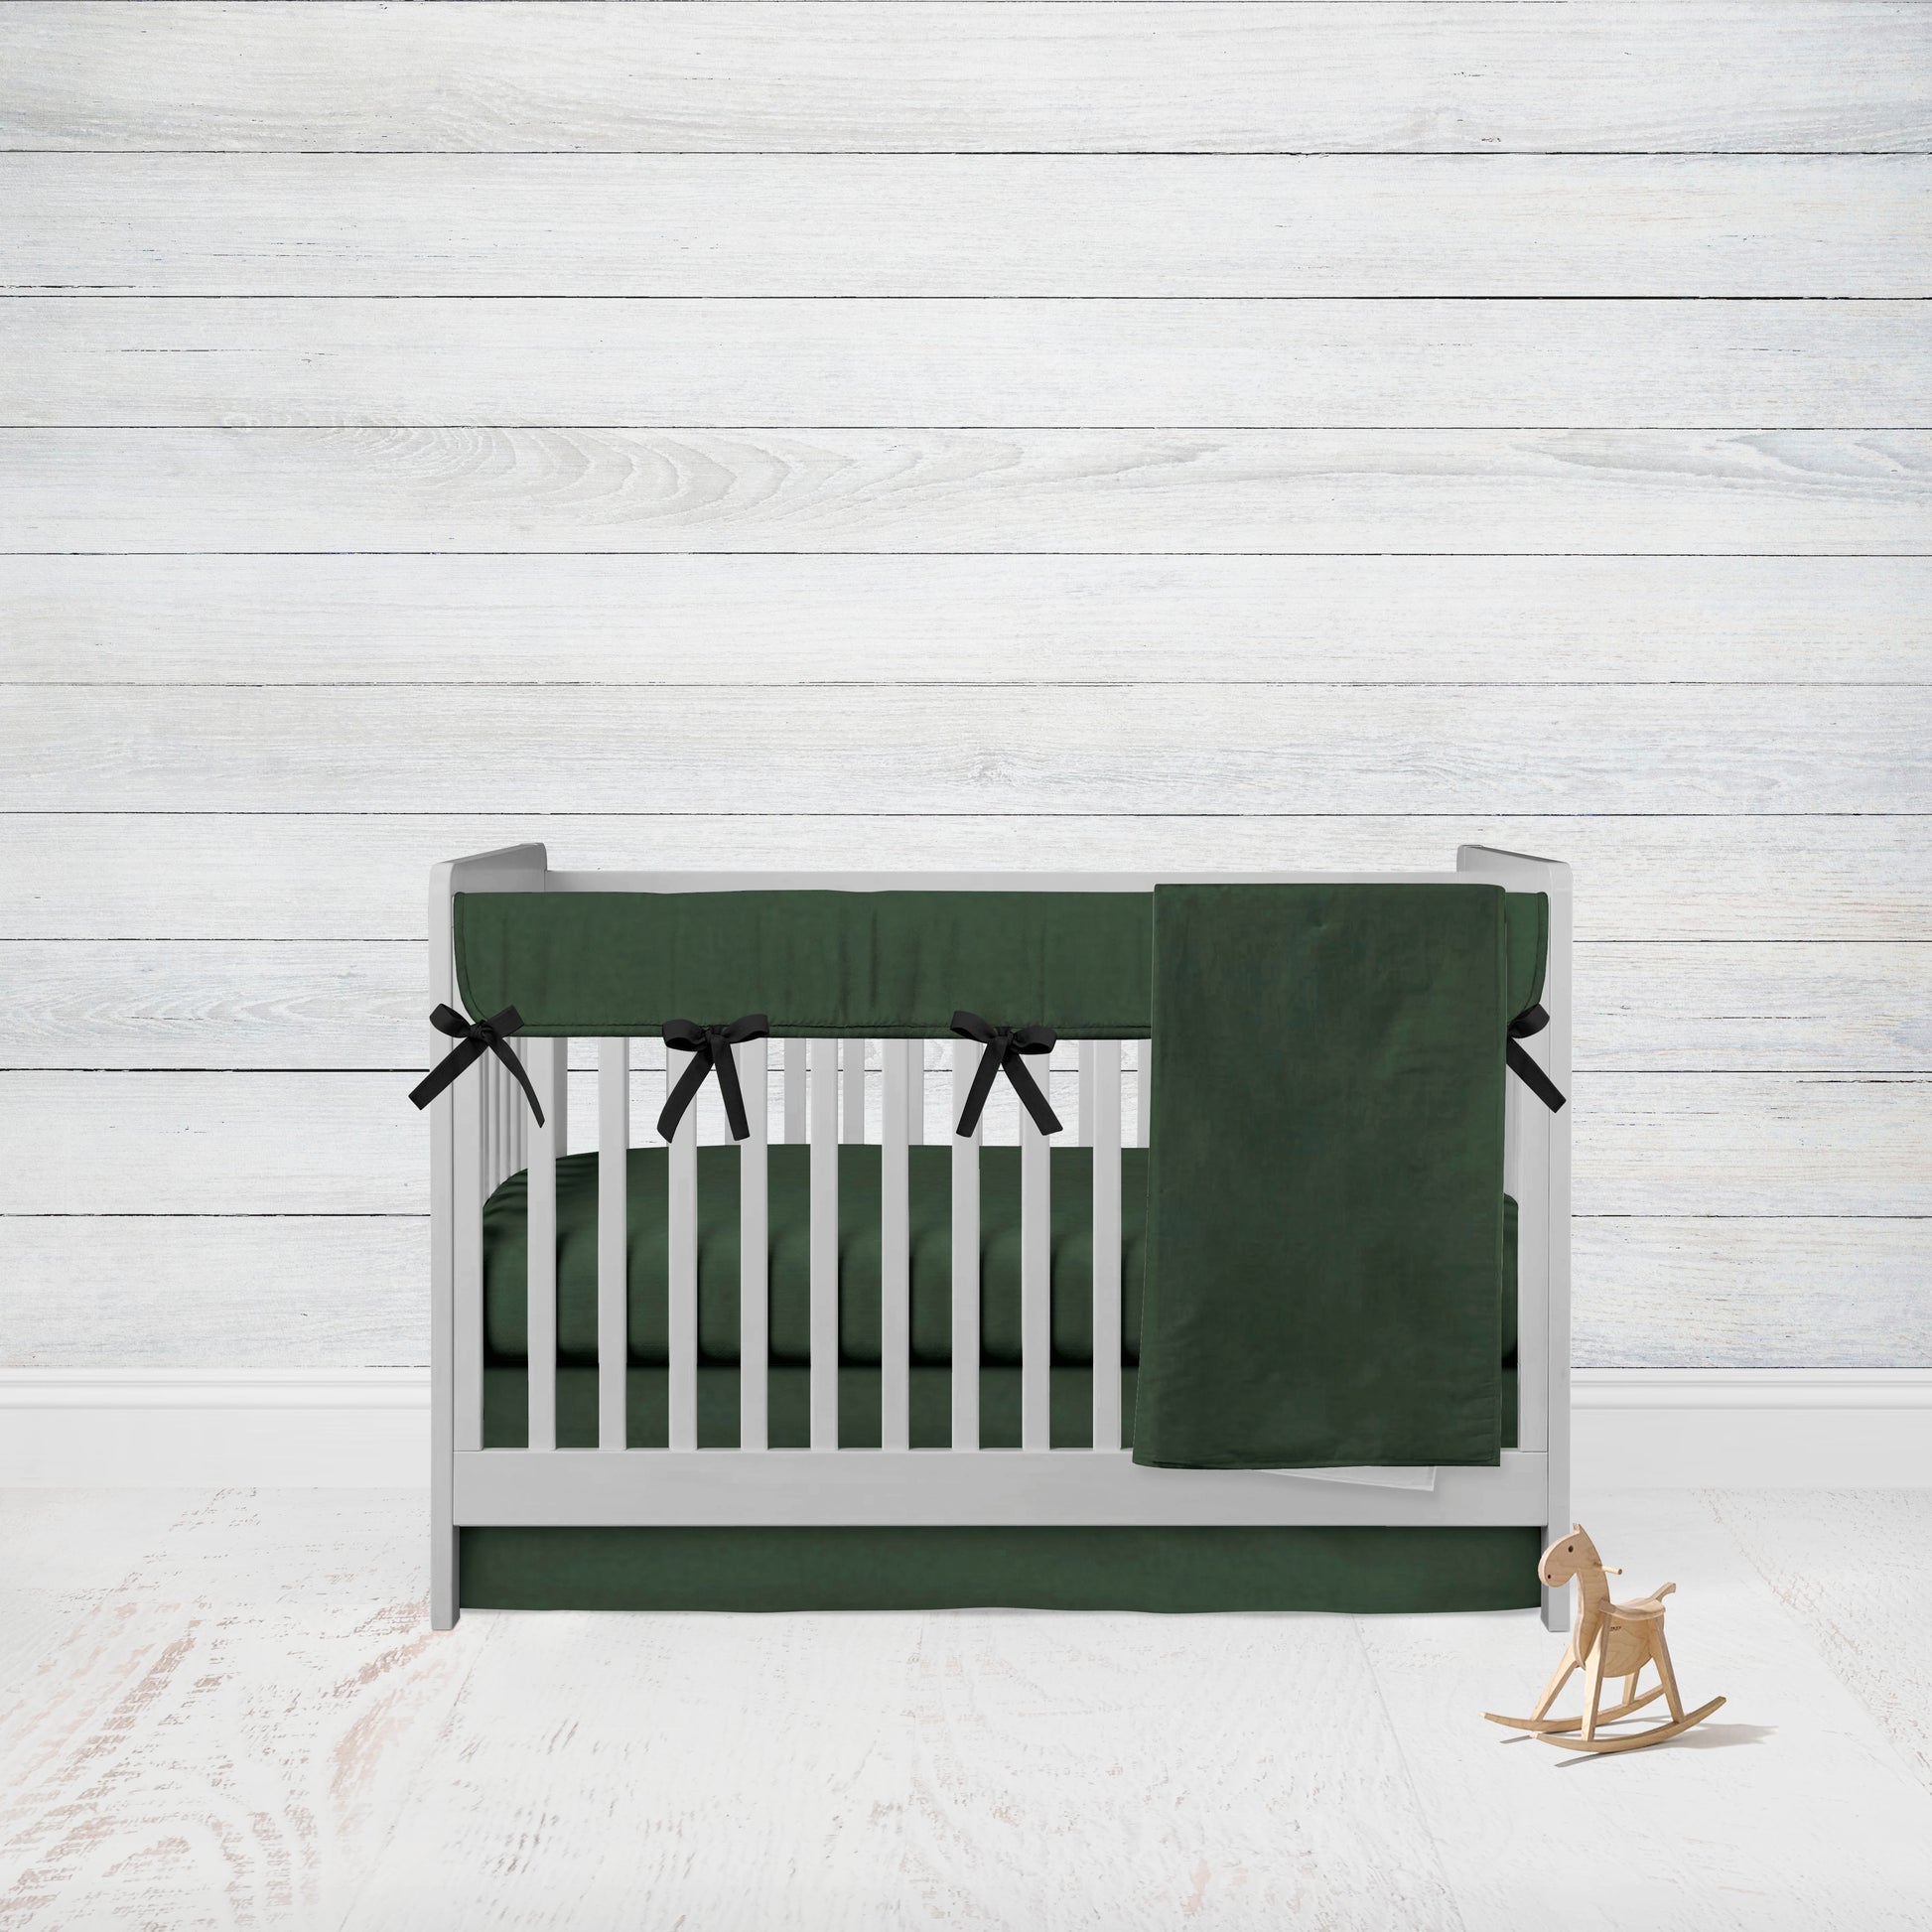 4-piece set includes hunter green crib rail cover, crib sheet, crib skirt and blanket. 5 piece set includes all items listed & changing pad cover